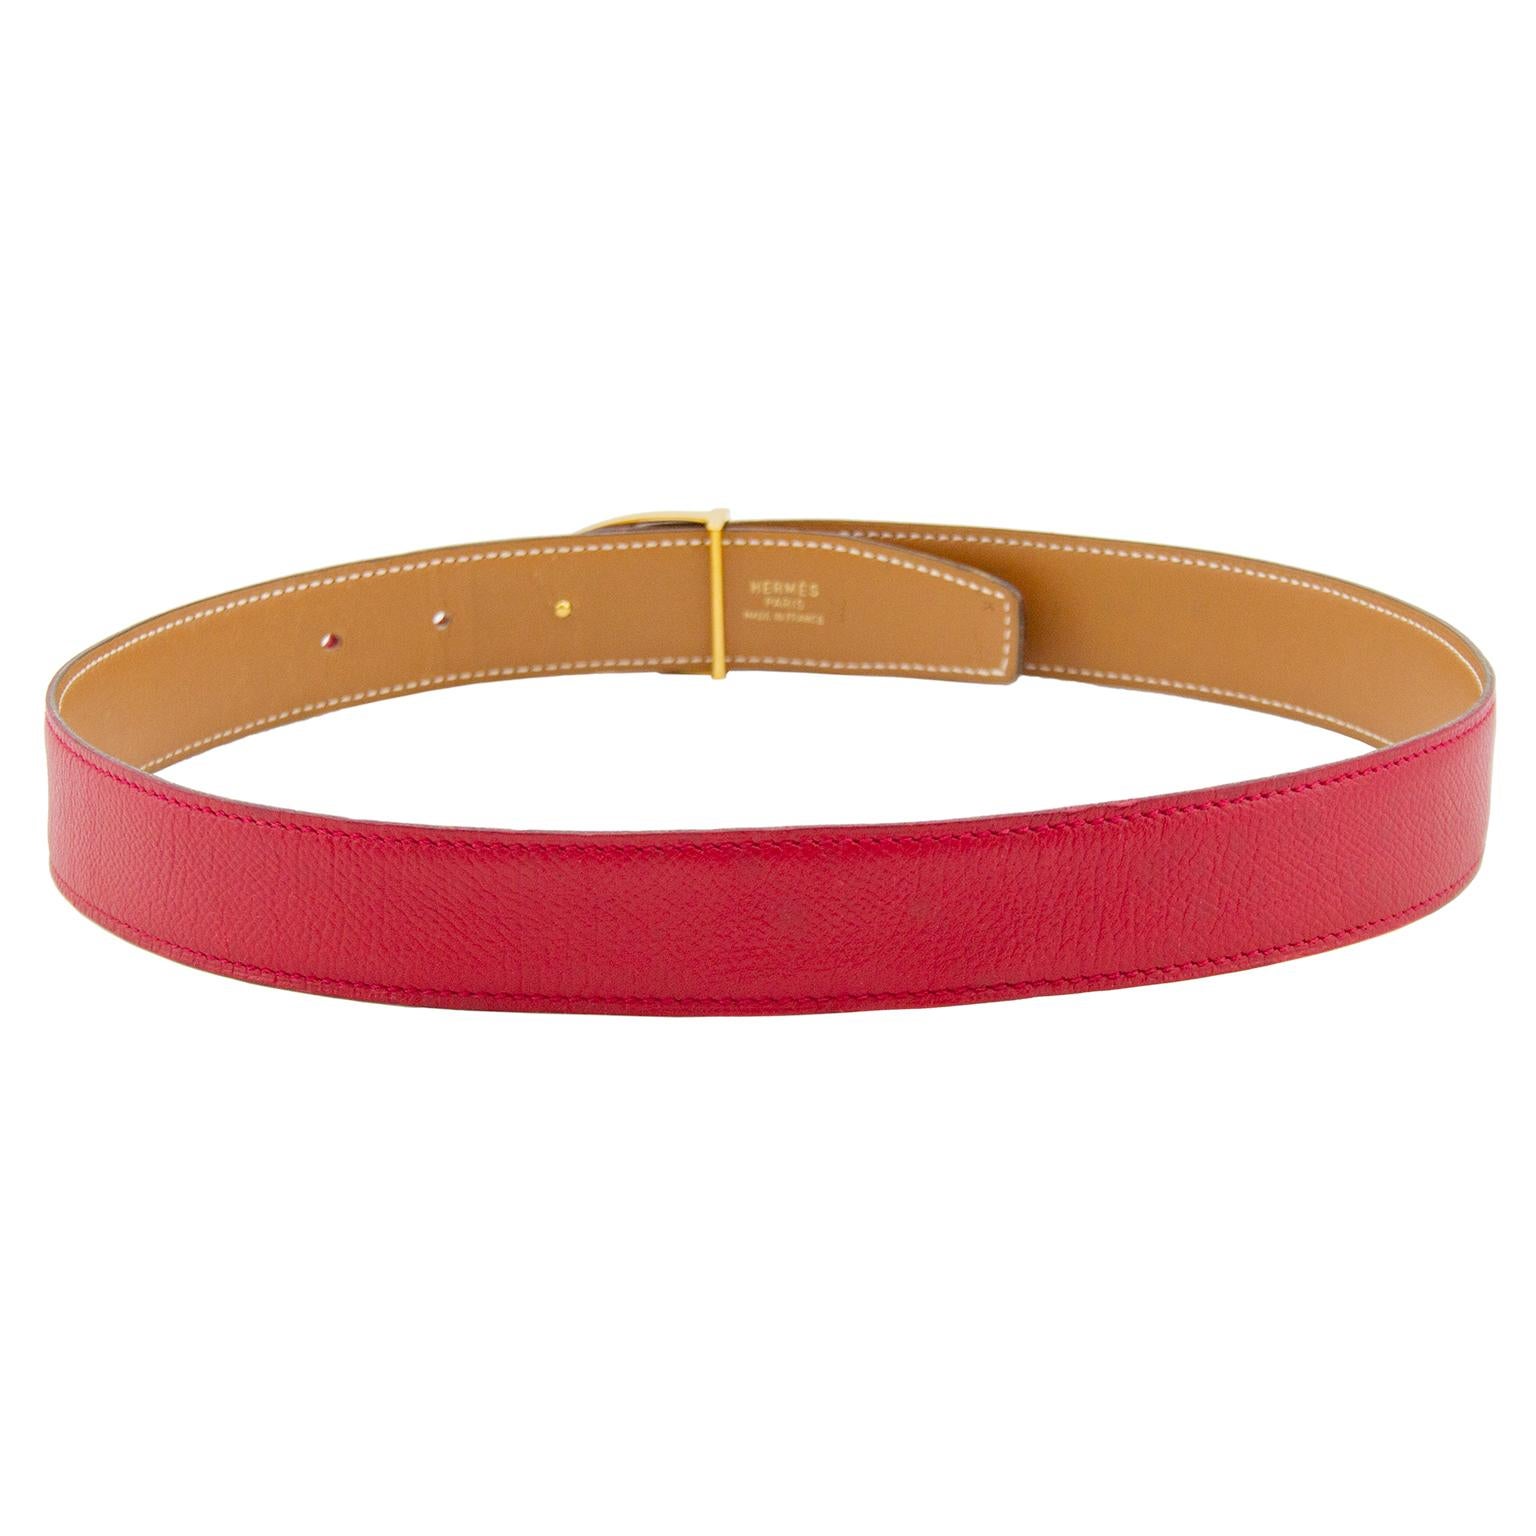 Stunning Hermes belt from 1990, as indicated by the blind stamp of a T in a circle. Rich red rigid leather with tonal exterior stitching and supple tan leather reverse with contrasting white top stitching. Gold tone stirrup buckle. Interior gold